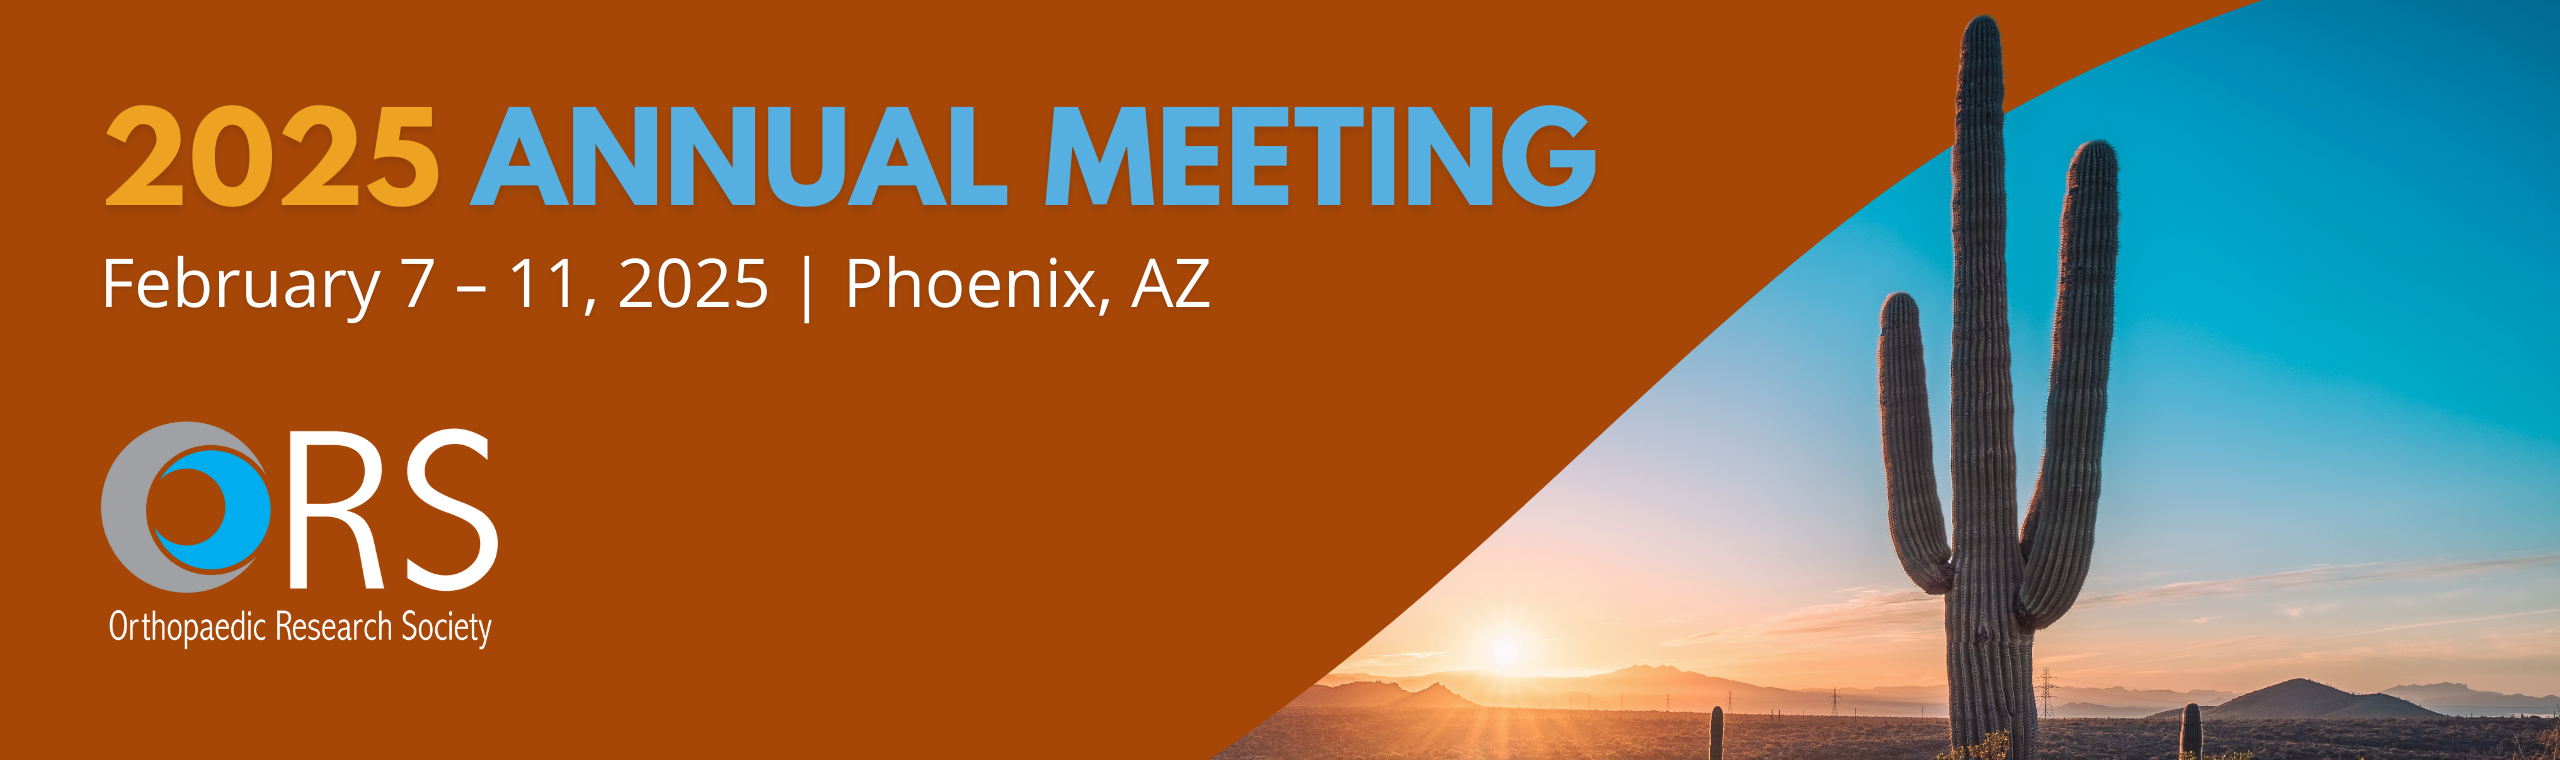 Orthopaedic Research Society Annual Meeting banner with a photo of a cactus in Phoenix, Arizona